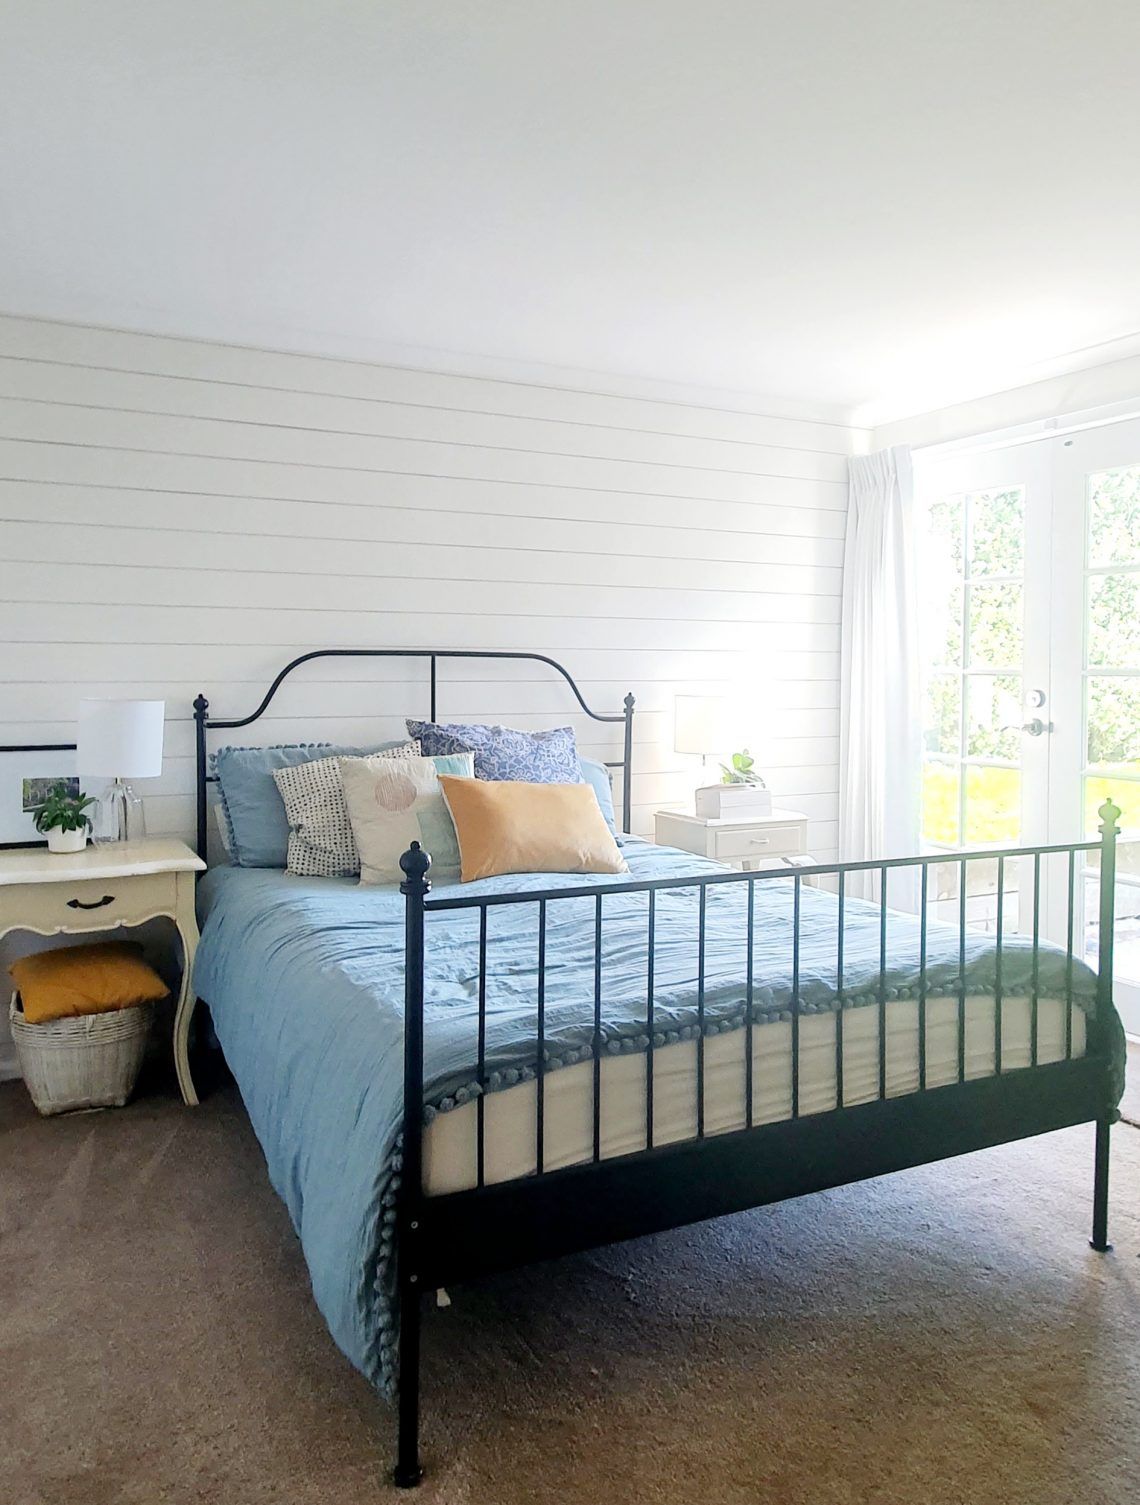 The Benefits of Investing in a
High-Quality Leirvik Bed Frame